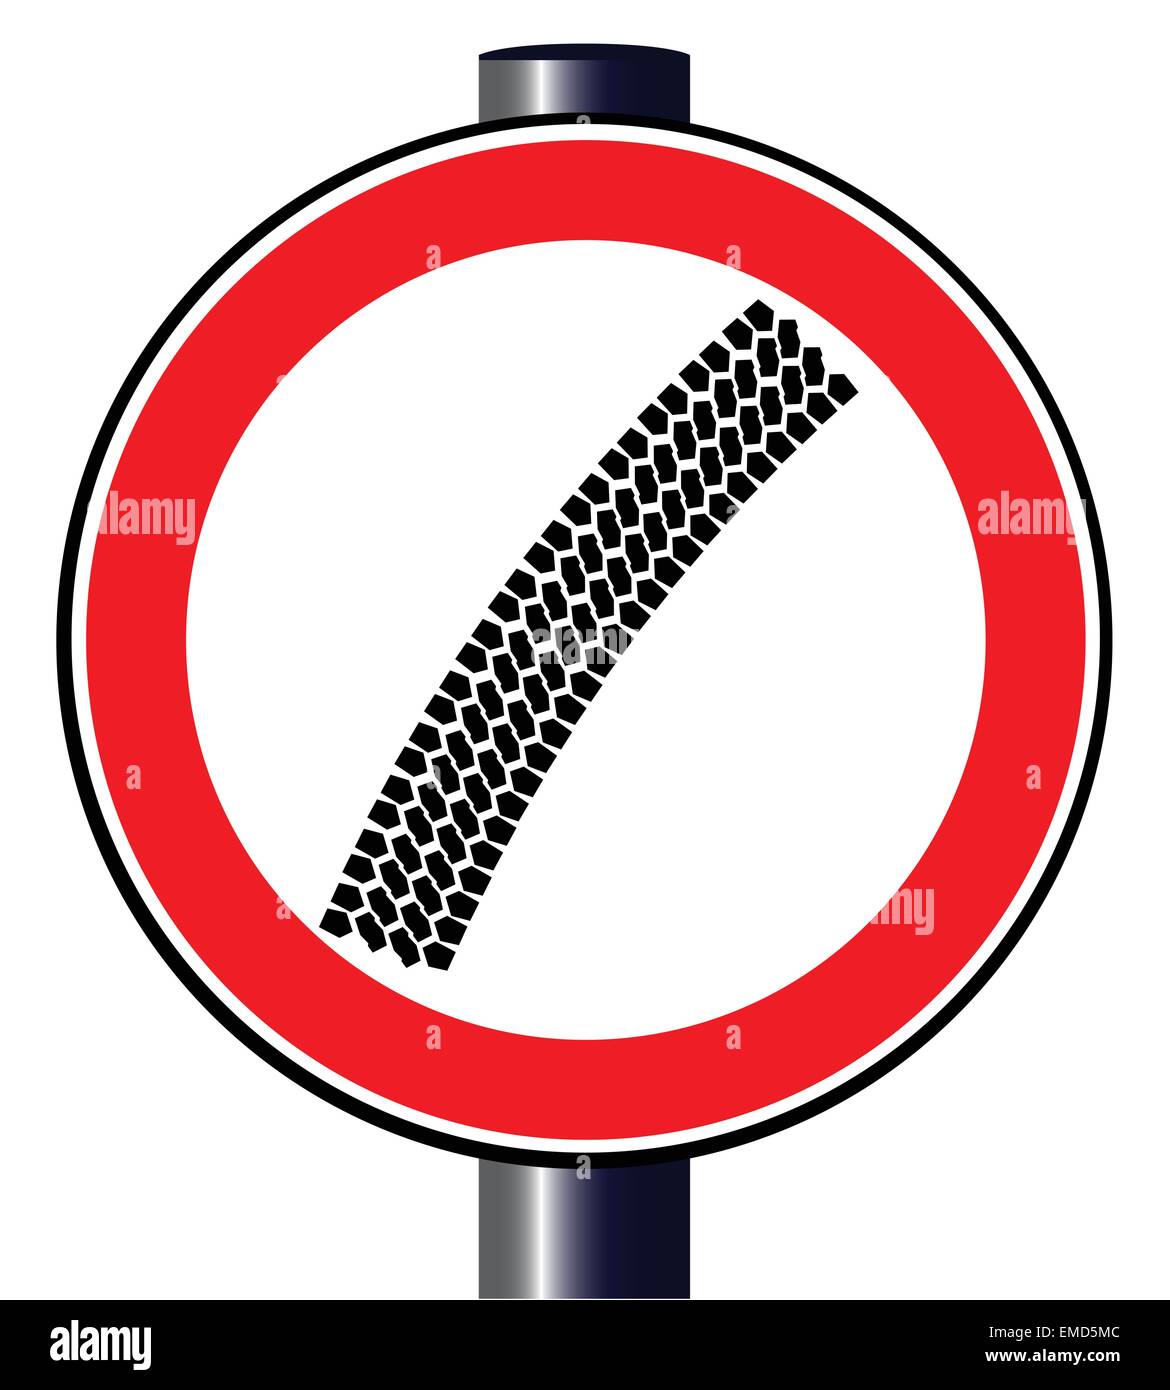 Tyre Marks On A Traffic Sign Stock Vector